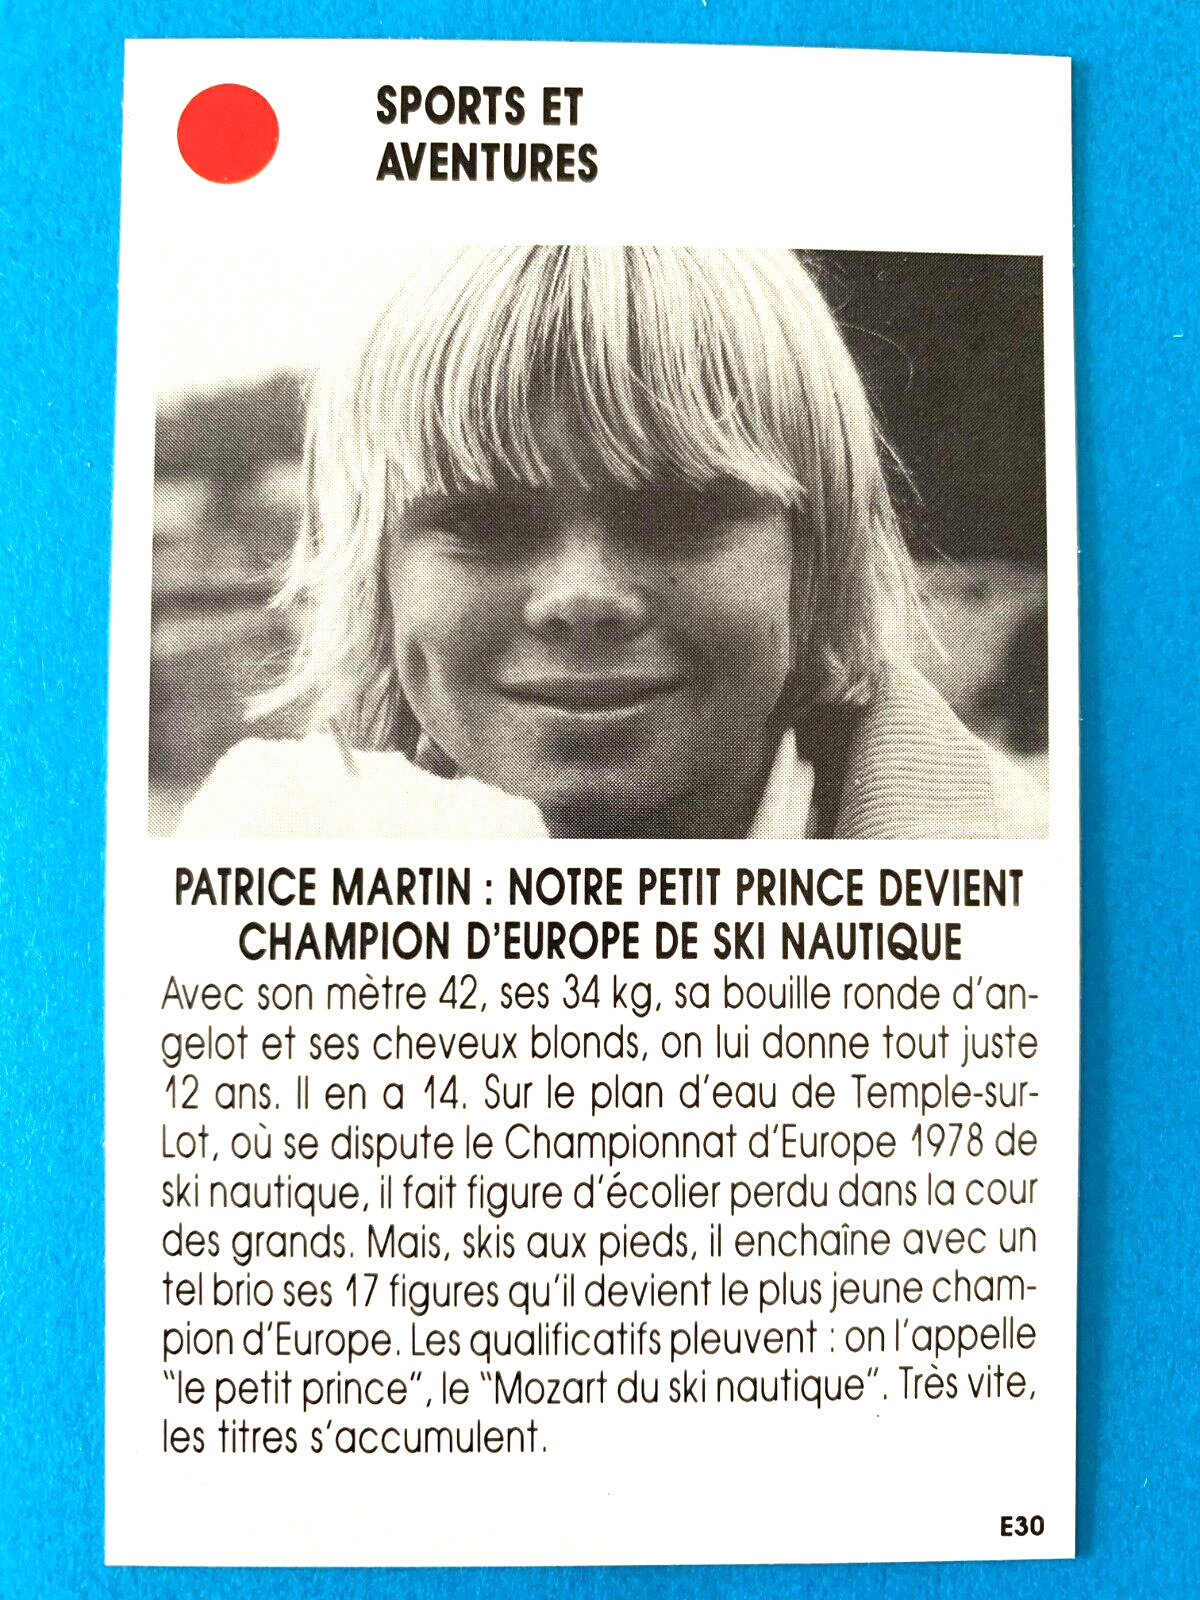 PATRICE MARTIN CHAMPION WATER SKI VERY RARE ROOKIE CARD FRENCH 1987 EDITION